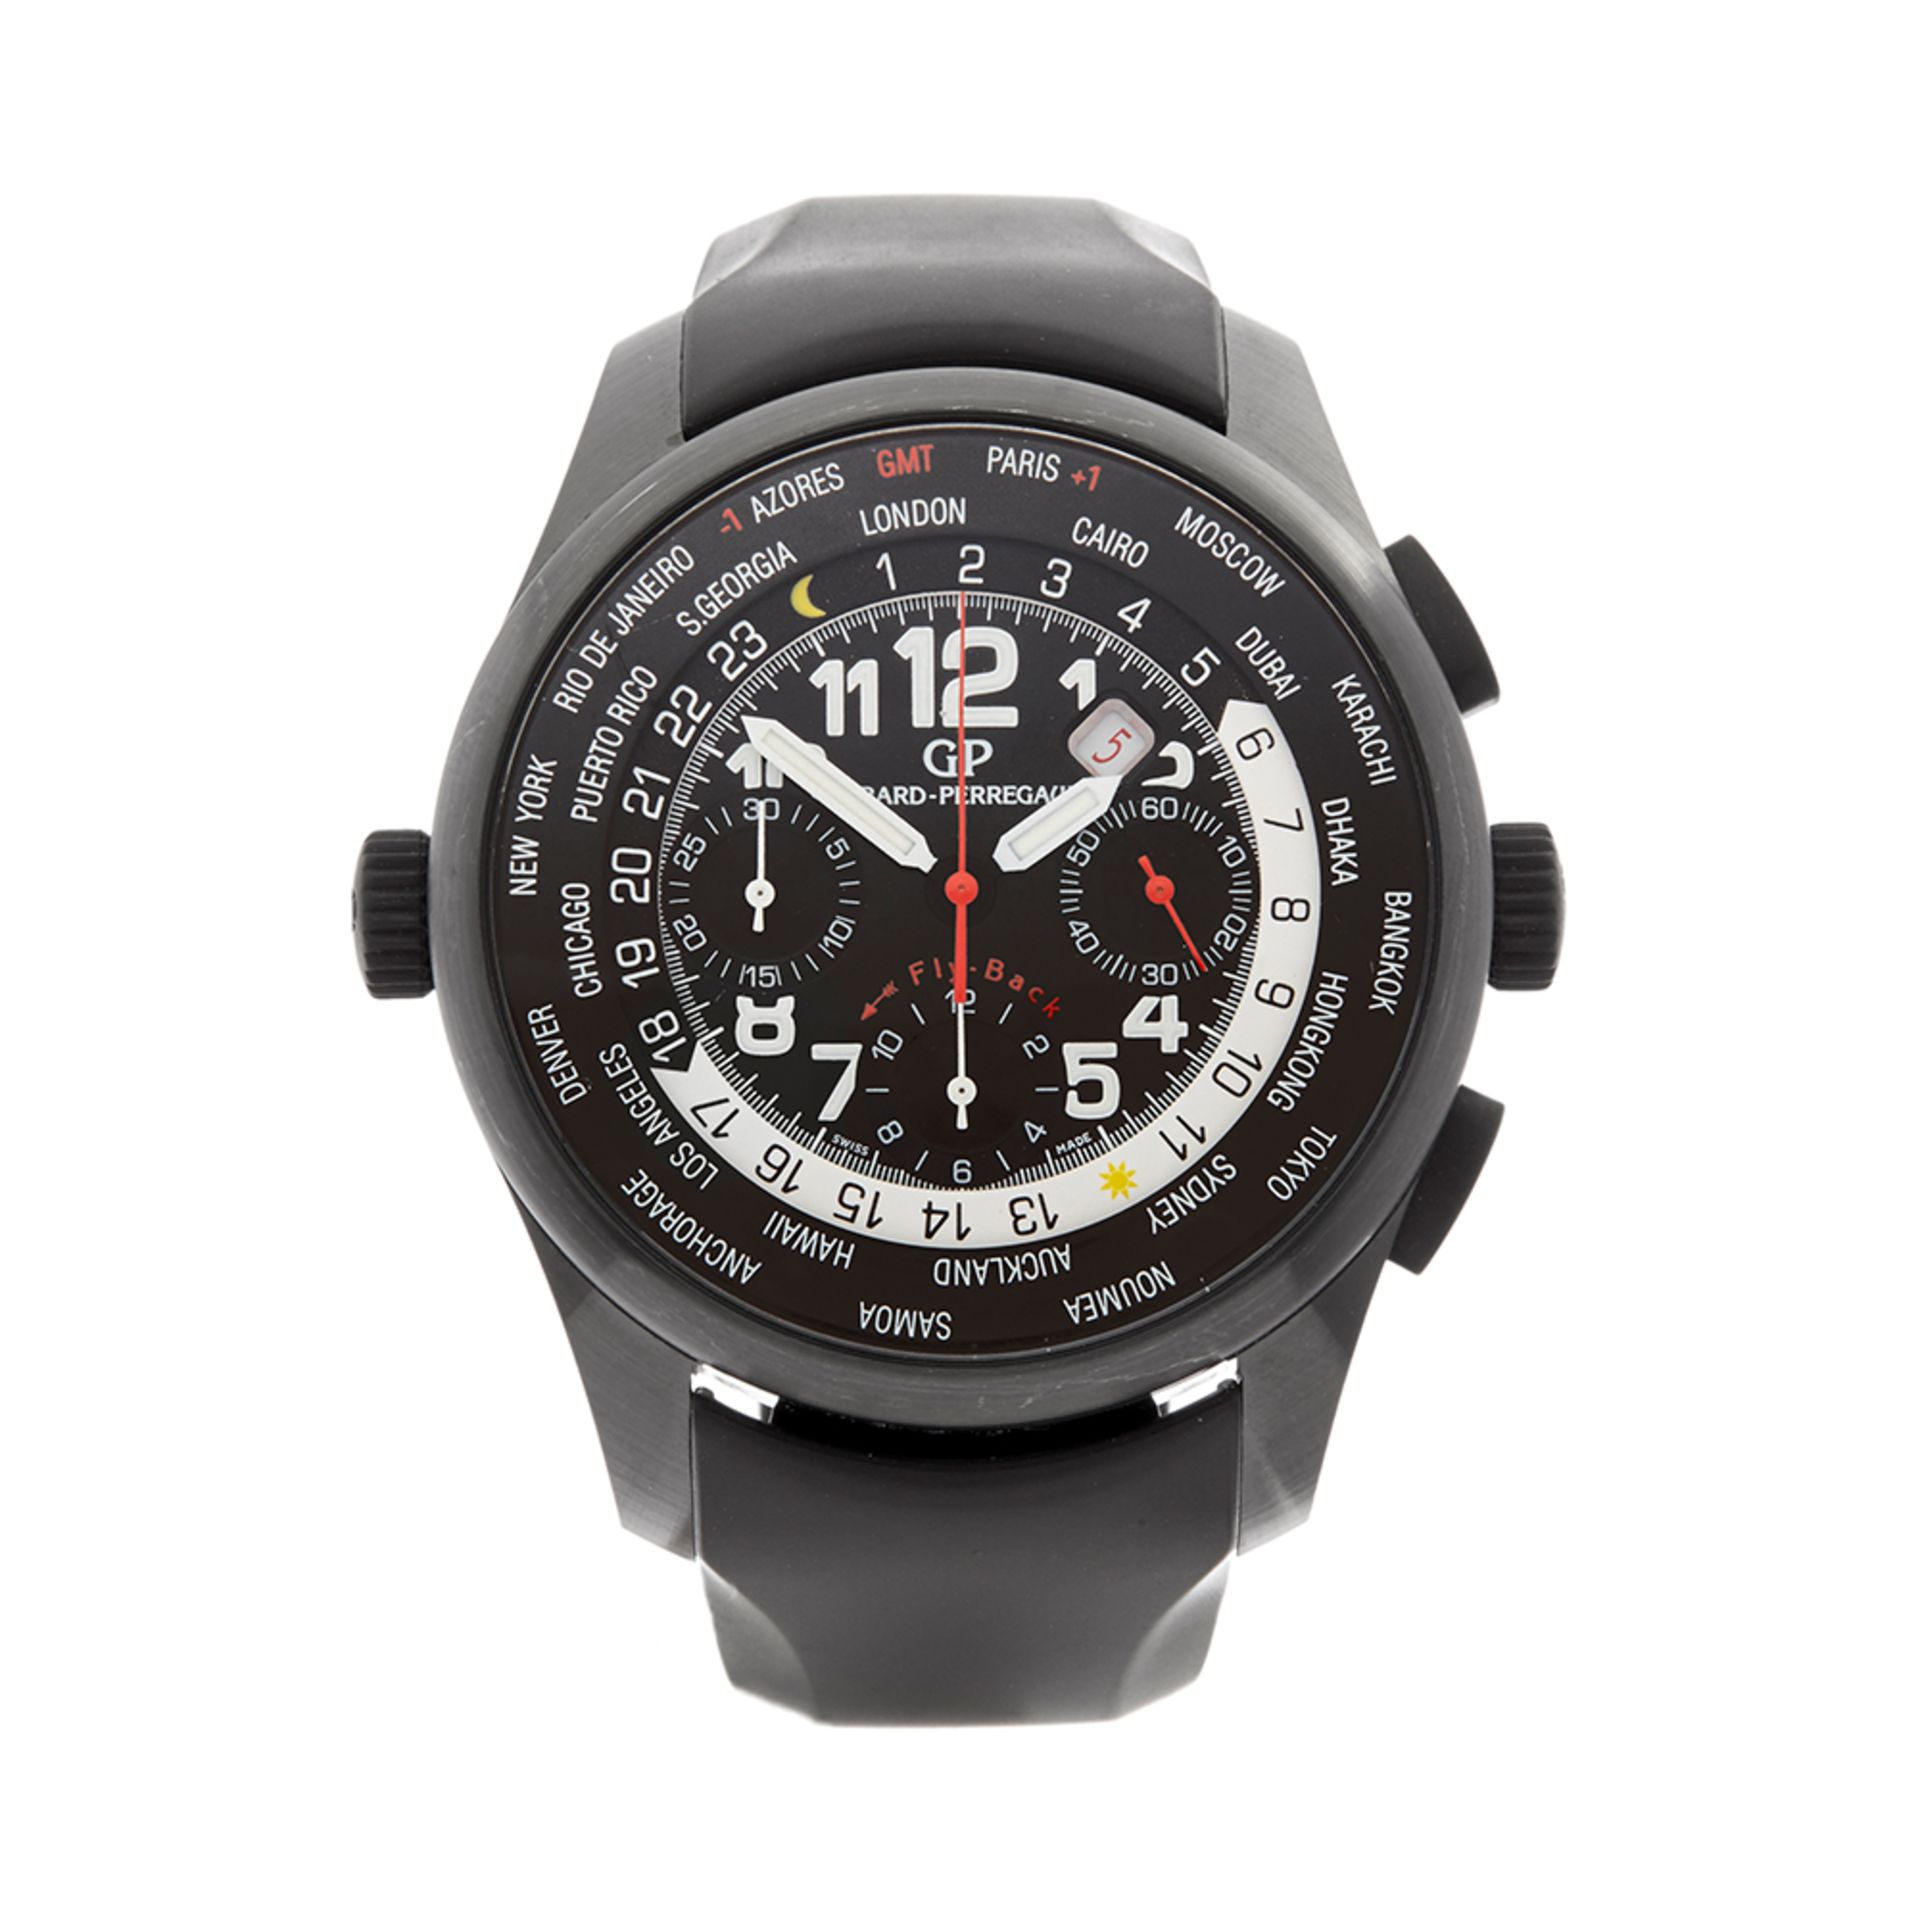 Girard Perregaux WW.TC Shadow Flyback Chronograph 43mm Black DLC Coated Stainless Steel - Image 2 of 7